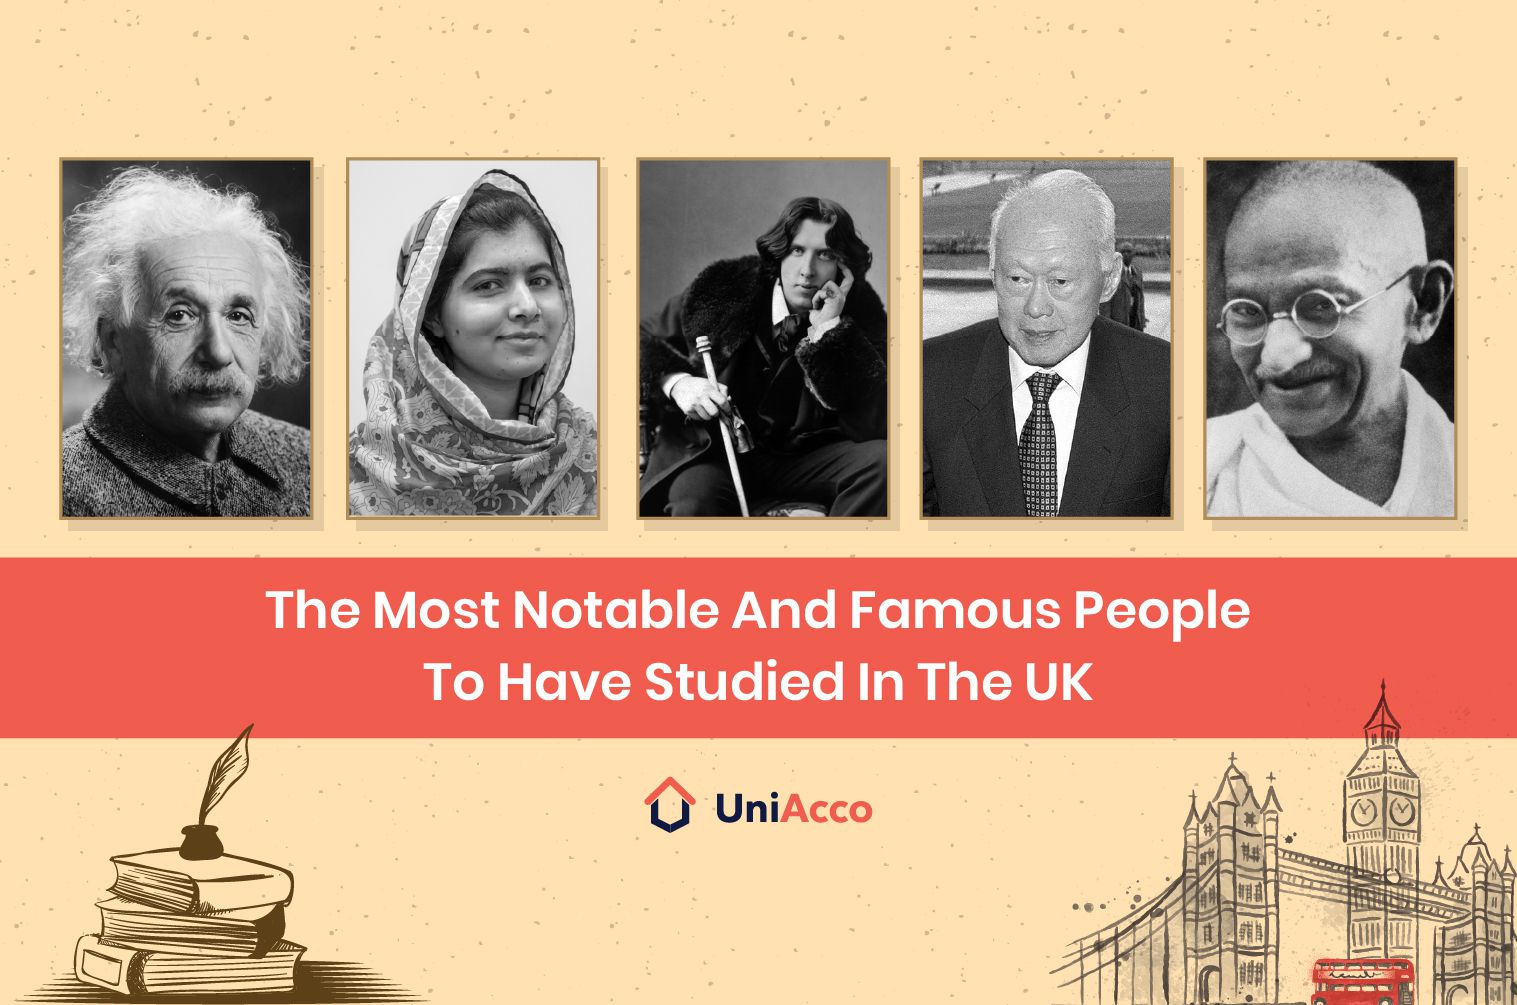 The Most Notable And Famous People To Have Studied In The UK